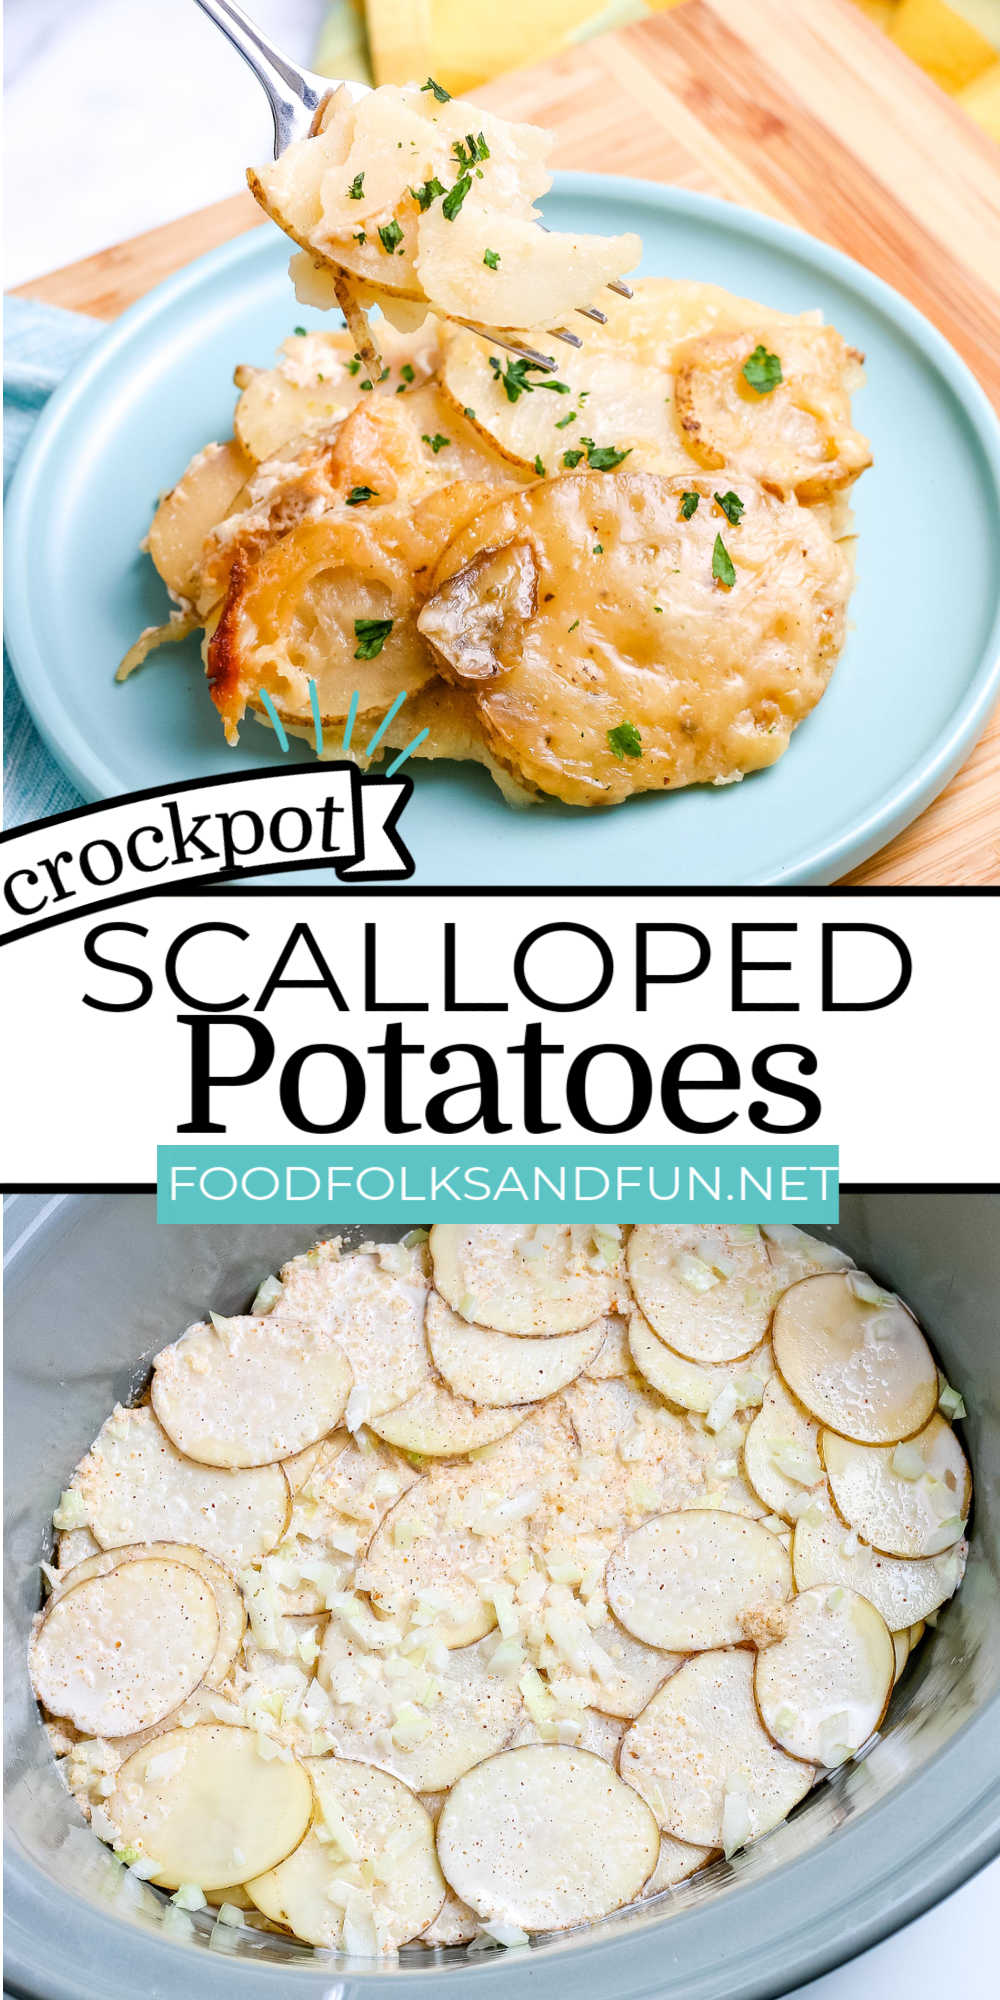 This Crockpot Scalloped Potatoes recipe is easy to make and made with three different kinds of cheese! It's a great side dish for weeknights or holidays like Thanksgiving, Christmas, and Easter. via @foodfolksandfun